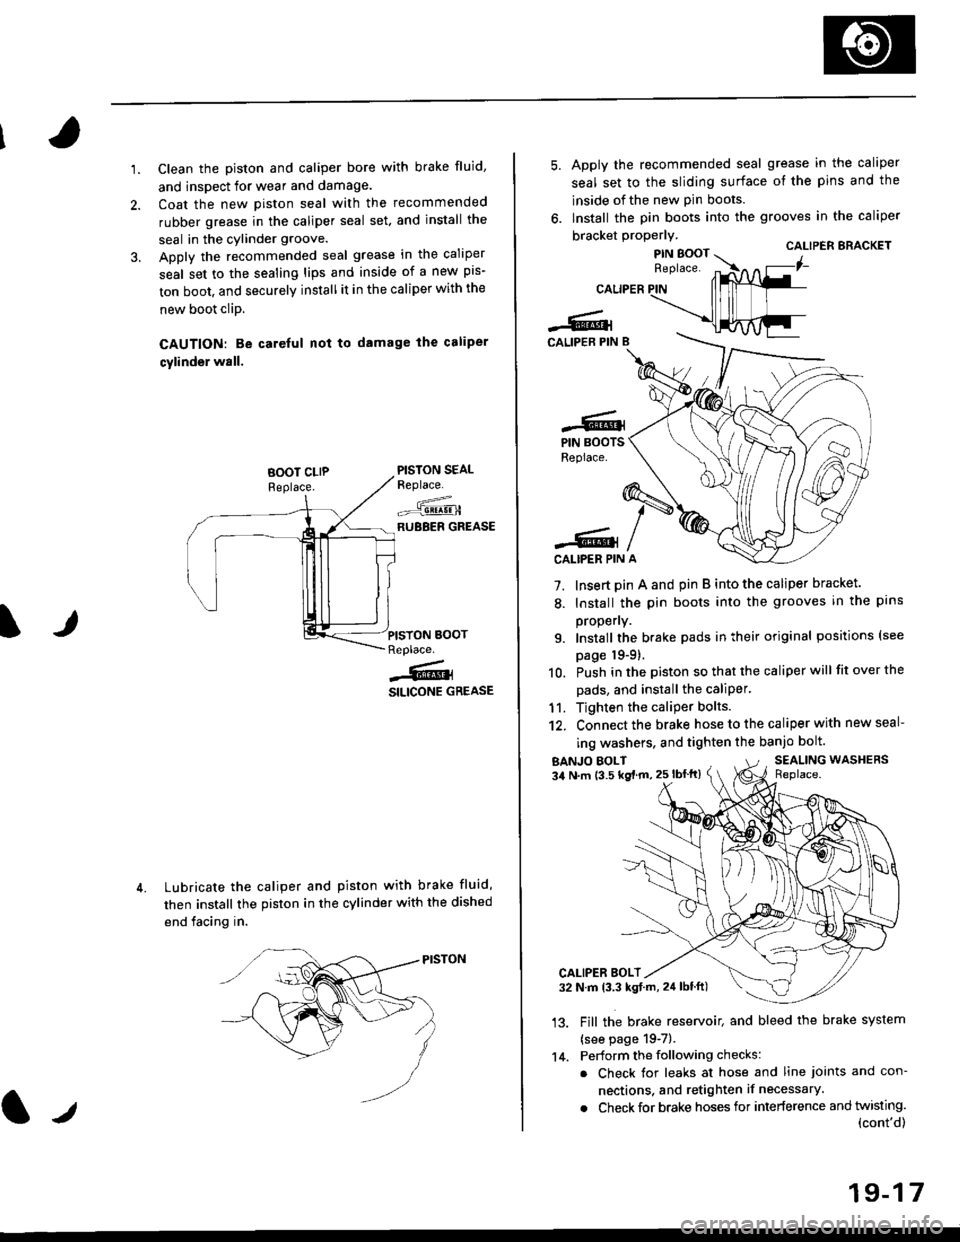 HONDA CIVIC 2000 6.G Workshop Manual 1.Clean the piston and caliper bore with brake fluid,
and inspect for wear and damage.
Coat the new piston seal with the recommended
rubber grease in the caliper seal set. and install the
seal in the